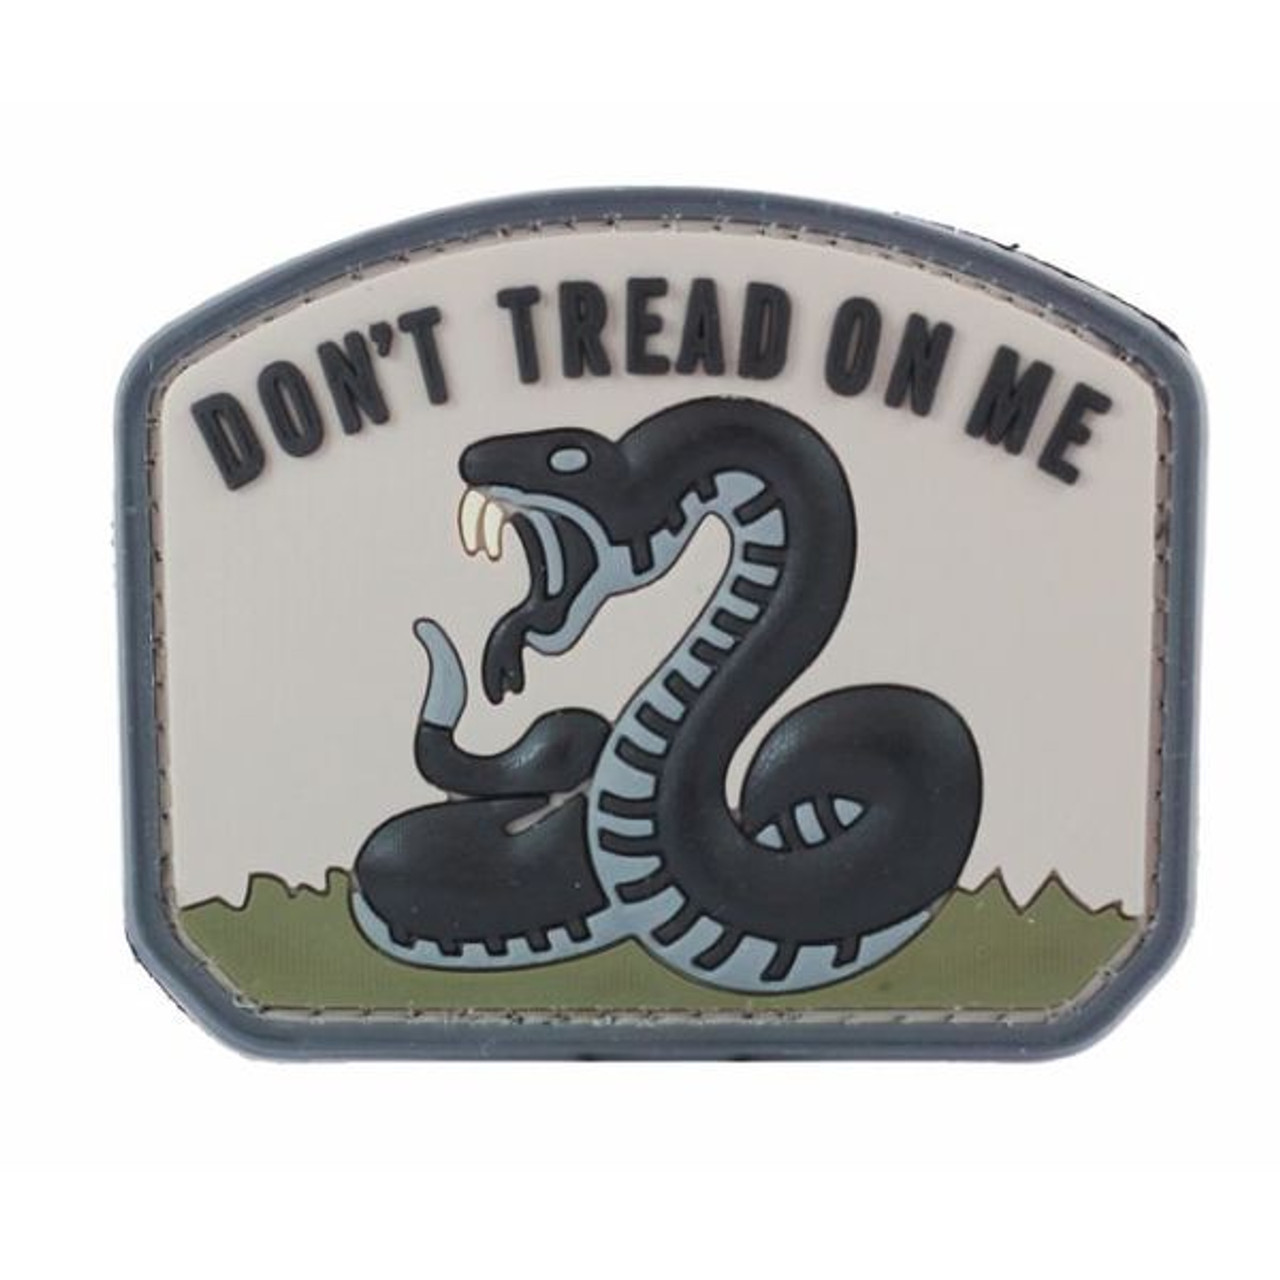 JBCD Dont Tread on Me Gadsden Flag Patch Tactical Patch - PVC Rubber Hook & Loop Fastener Patch (2 Pack)